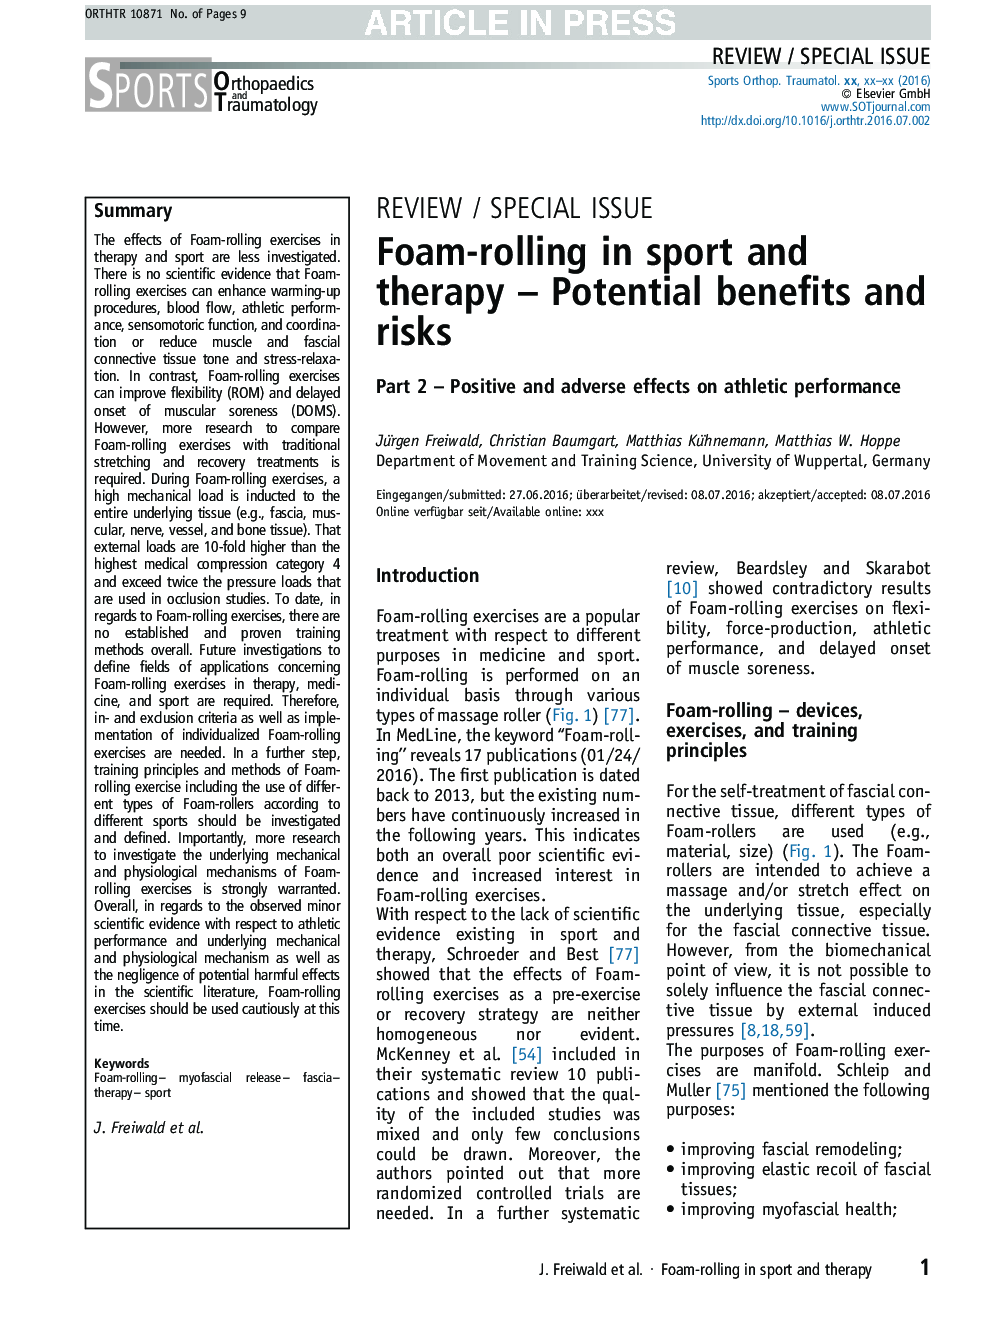 Foam-Rolling in sport and therapy - Potential benefits and risks